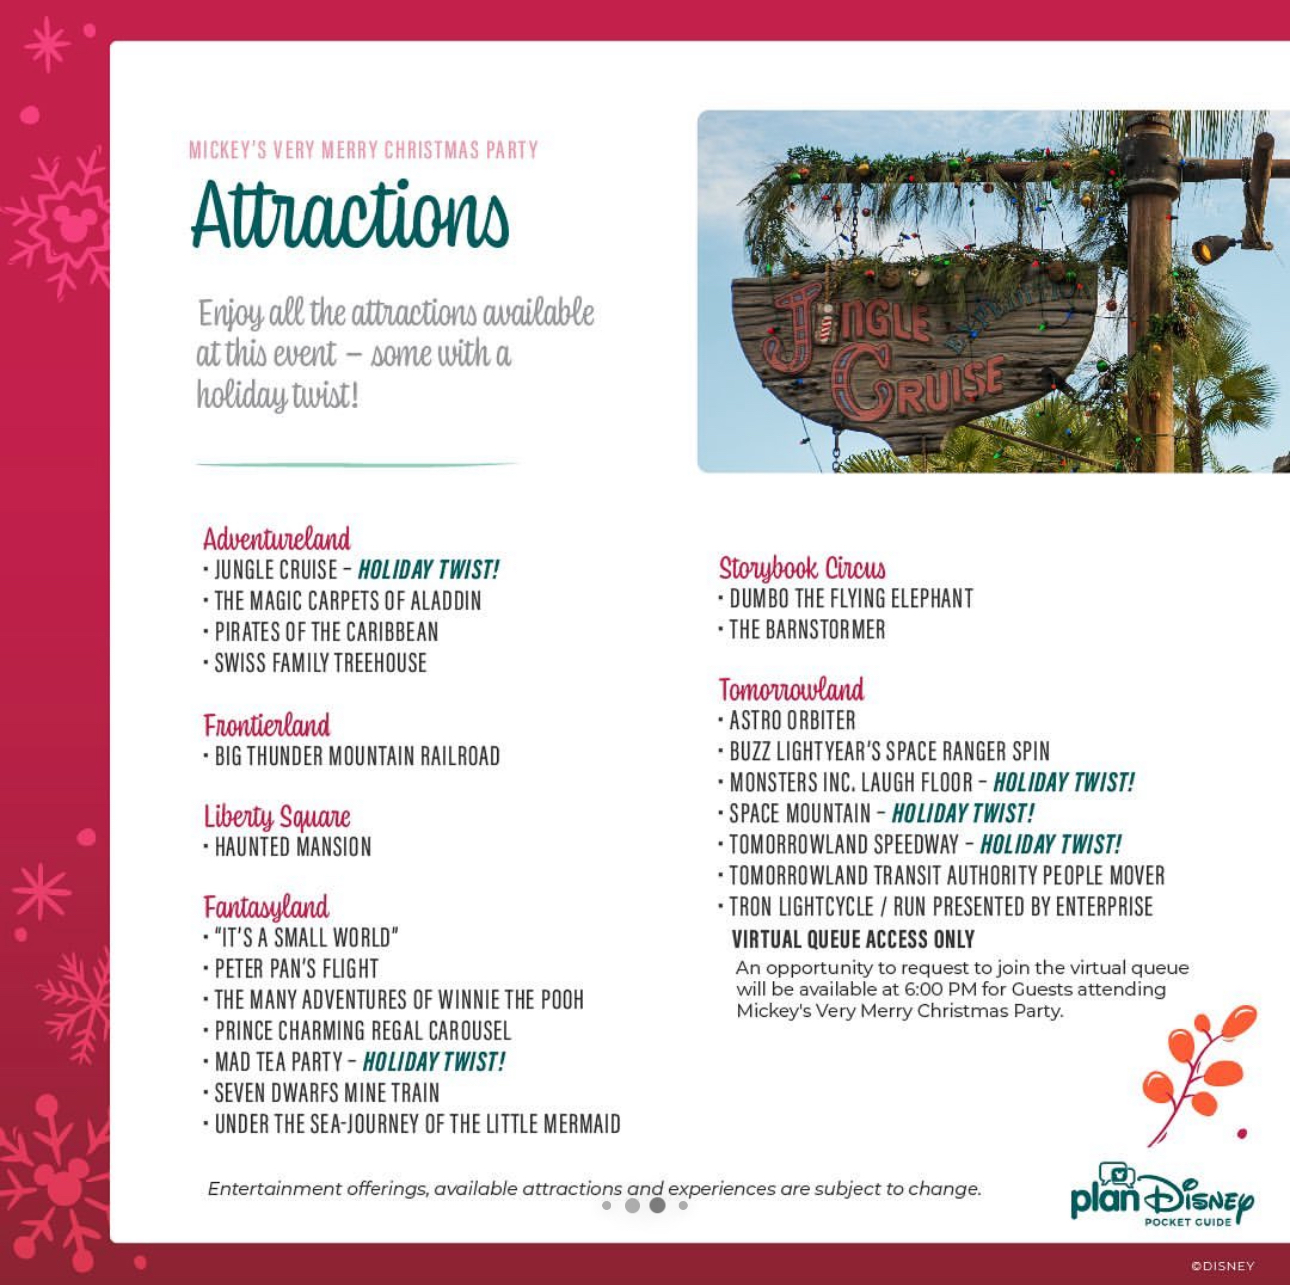 Mickey's Very Merry Christmas Party attractions